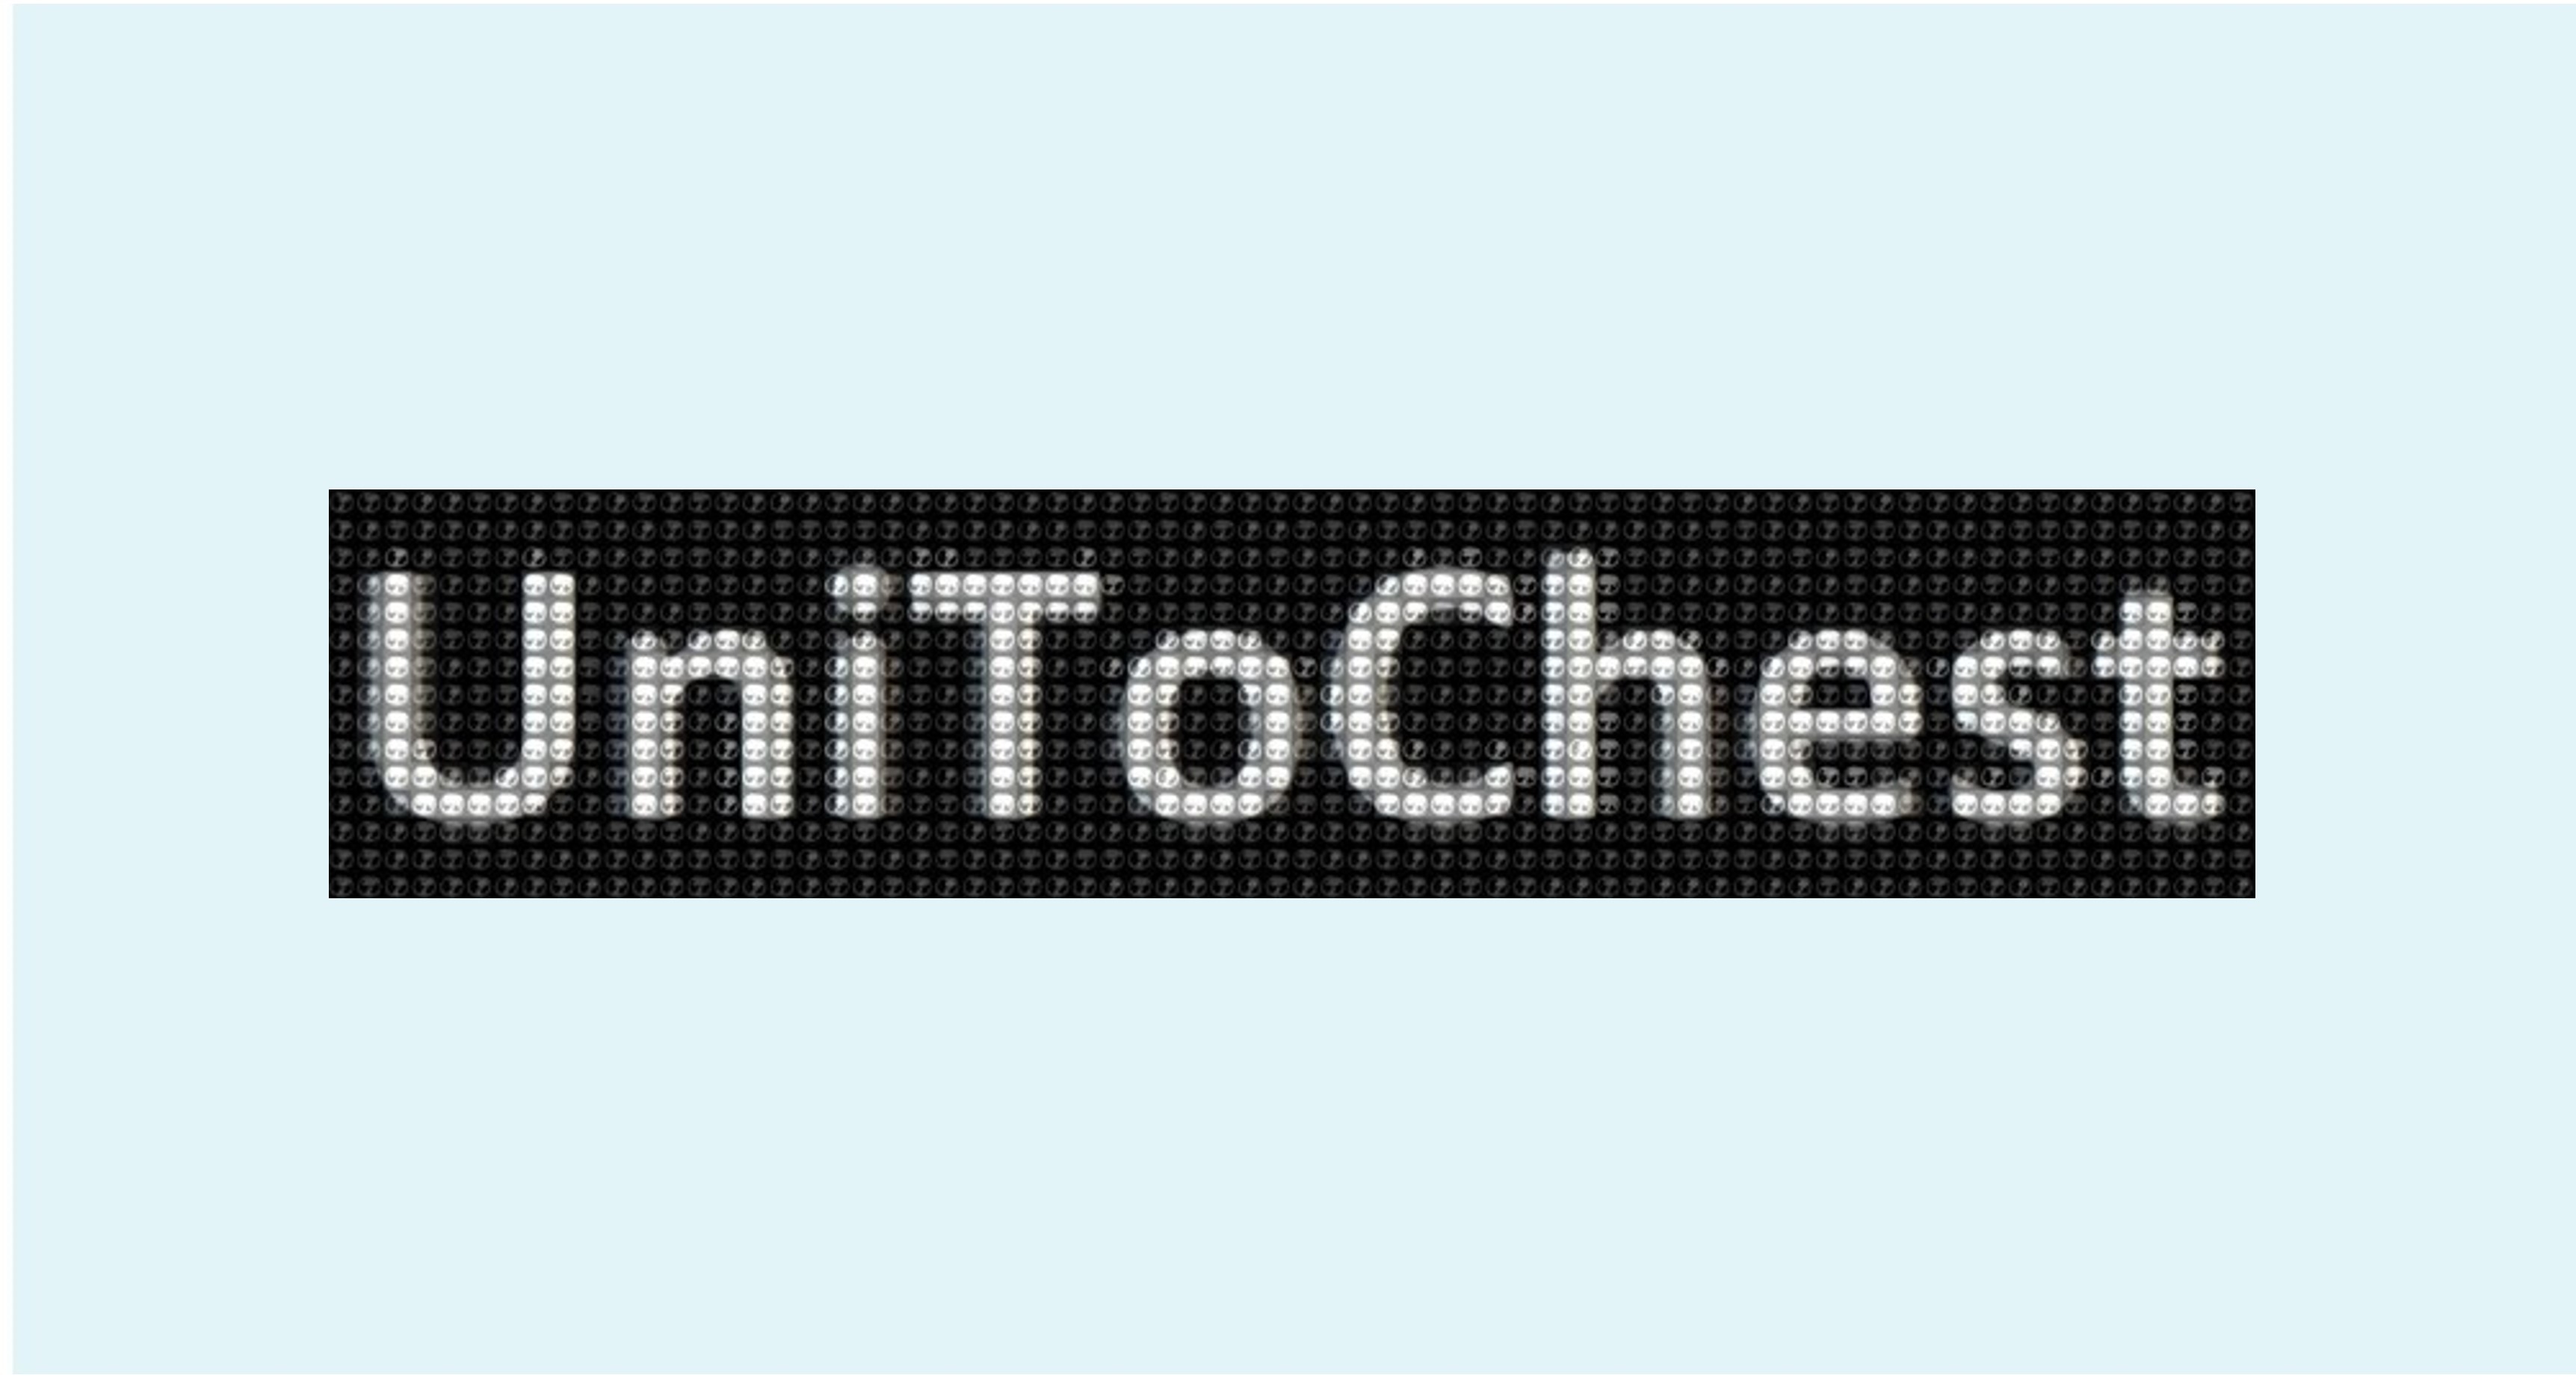 UniToChest dataset is now available